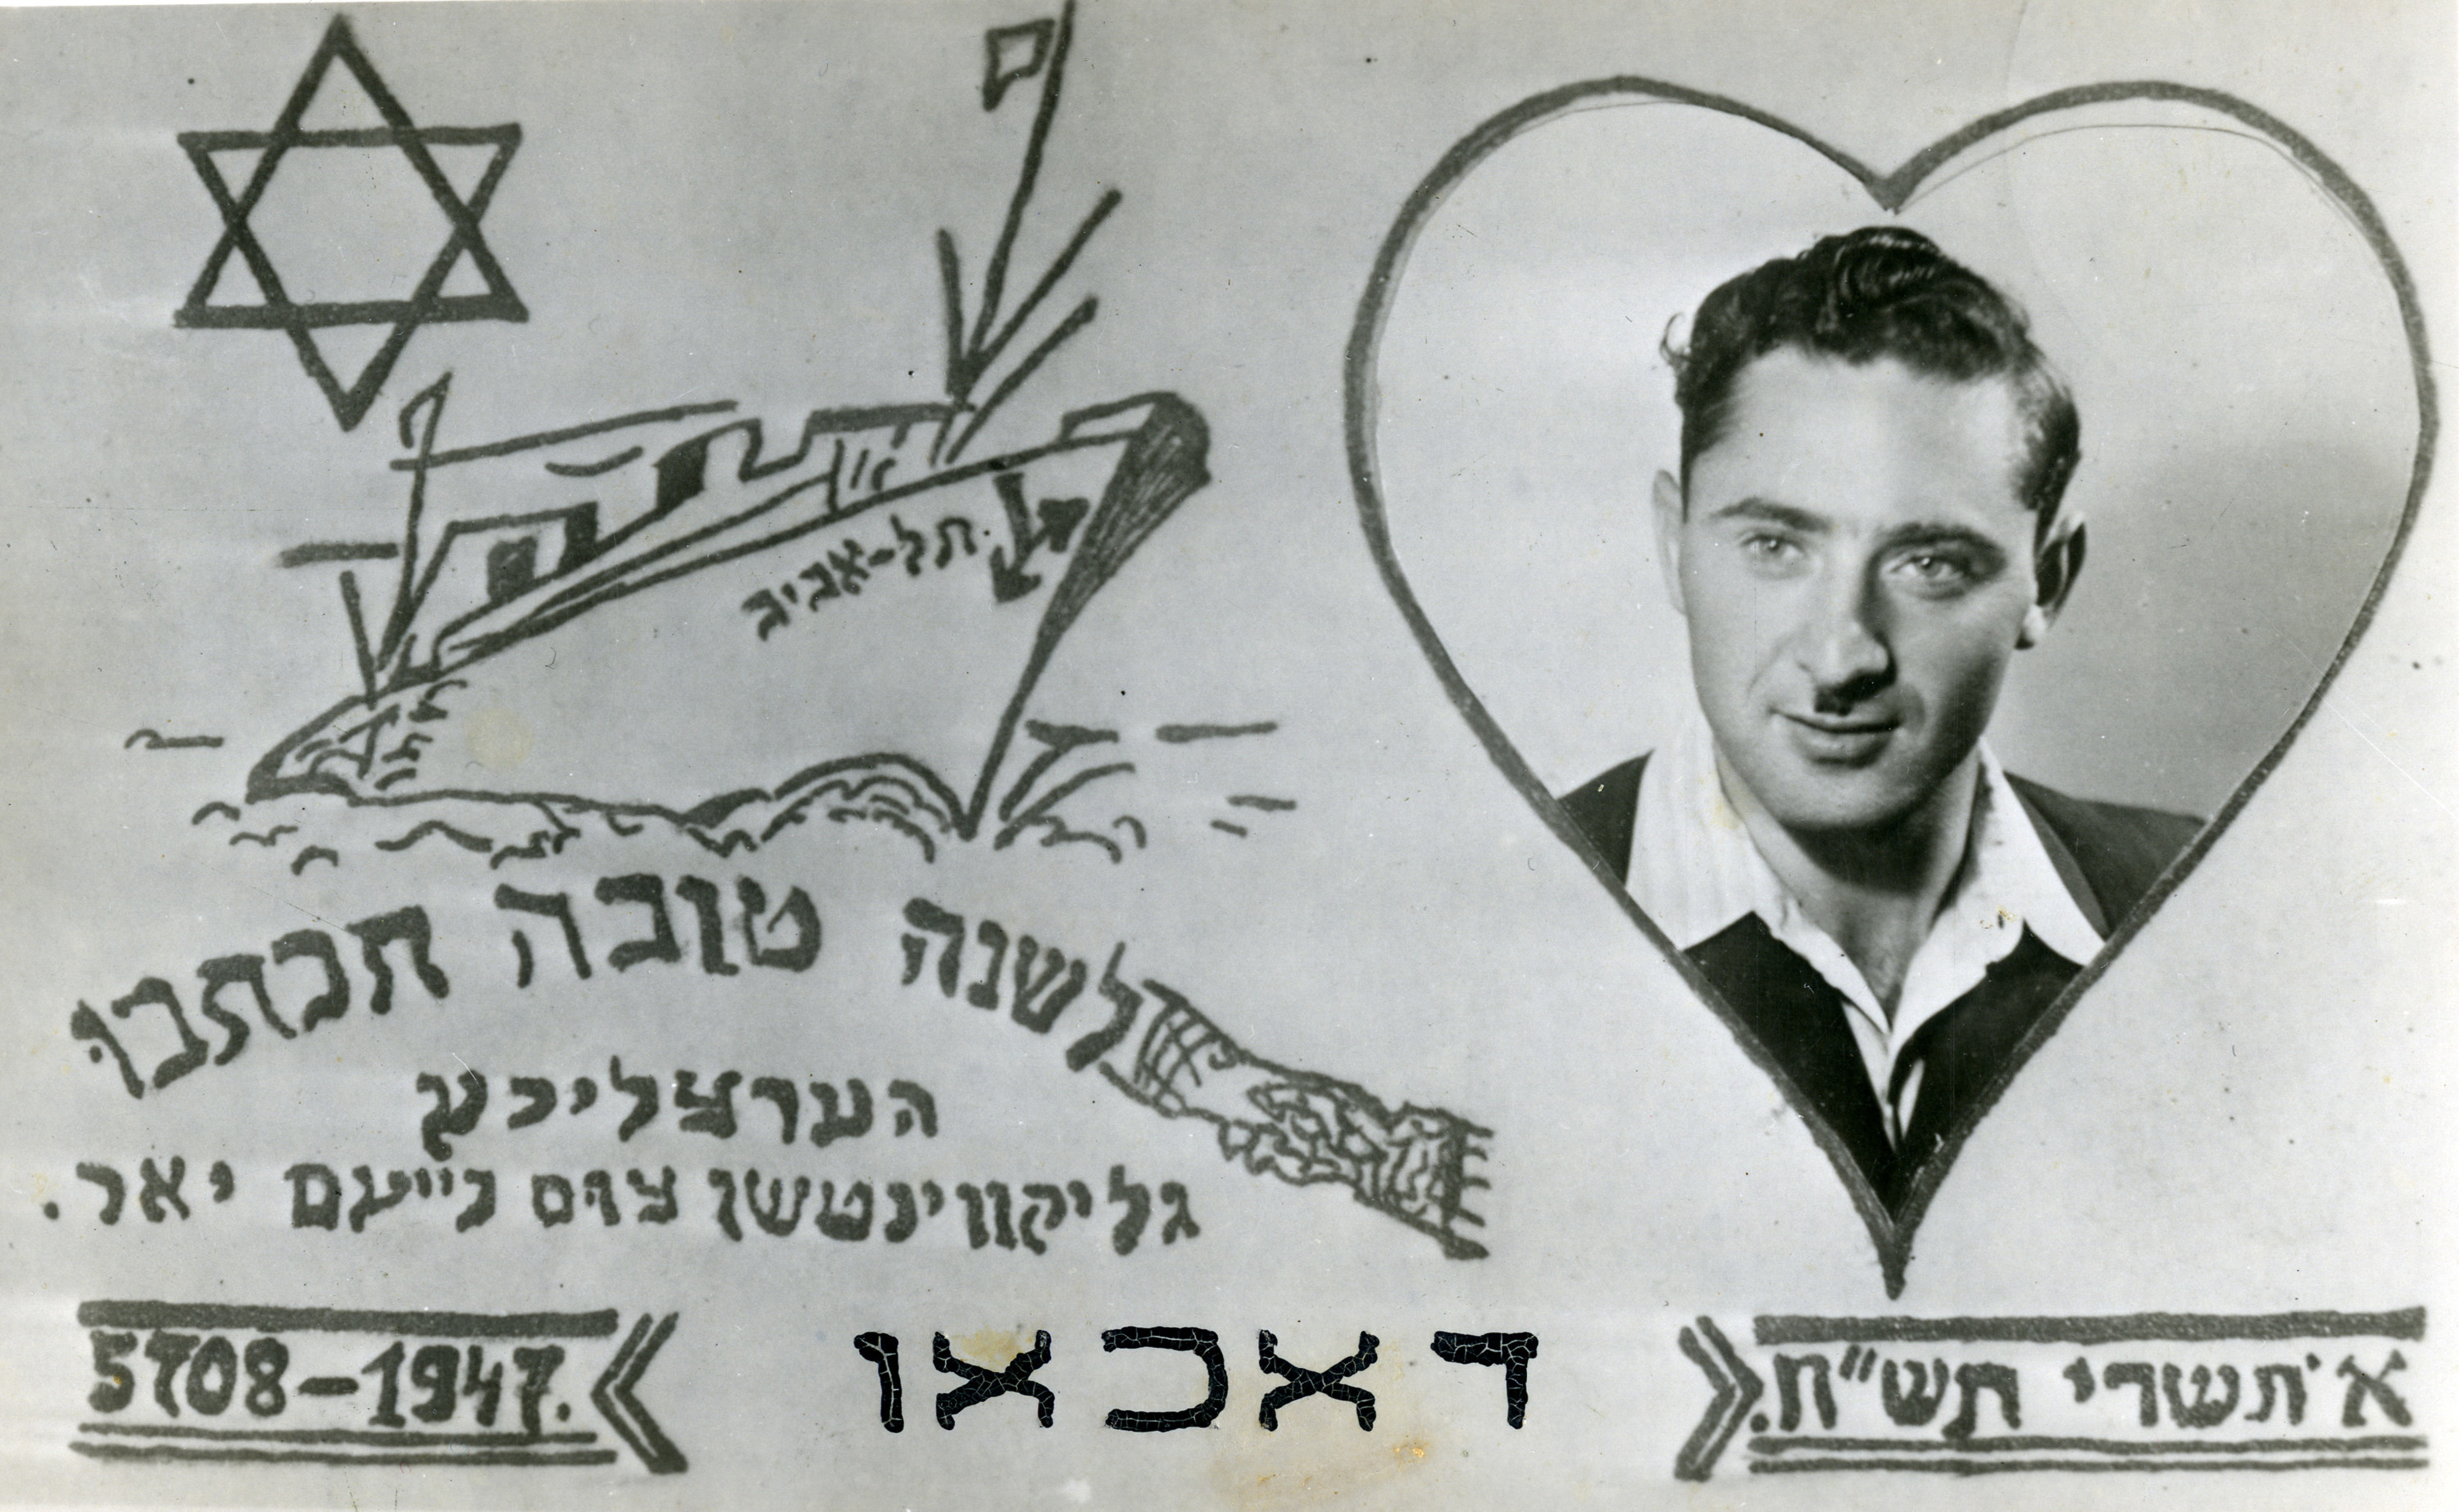 Rosh Hashanah card created in the Dachau displaced persons camp, from Josef Mondrai to Yehoshua Gold.

The includes a drawing of a ship with the name "Tel Aviv."